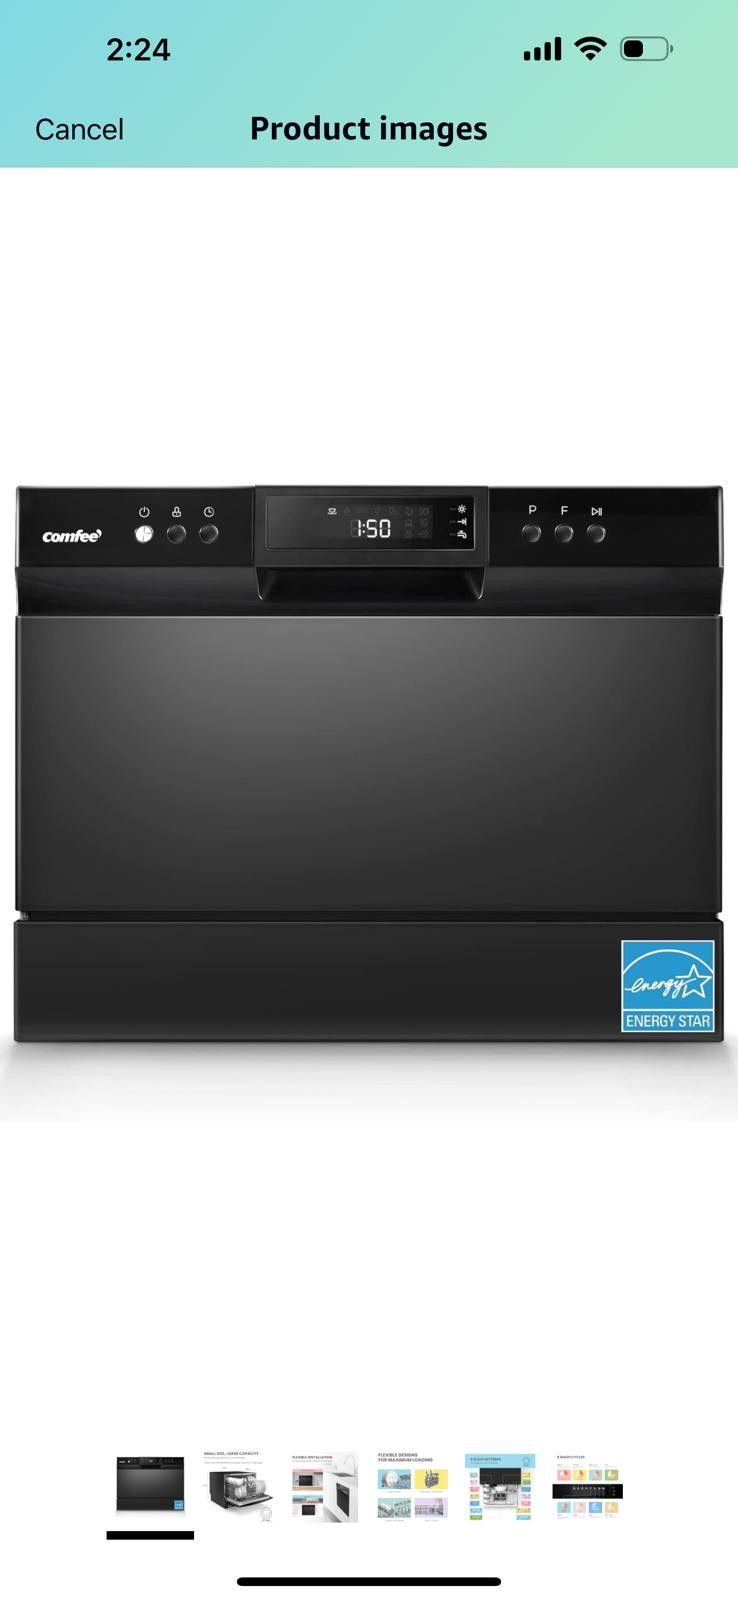 COMFEE’ Countertop Dishwasher, Energy Star Portable Dishwasher, 6 Place Settings